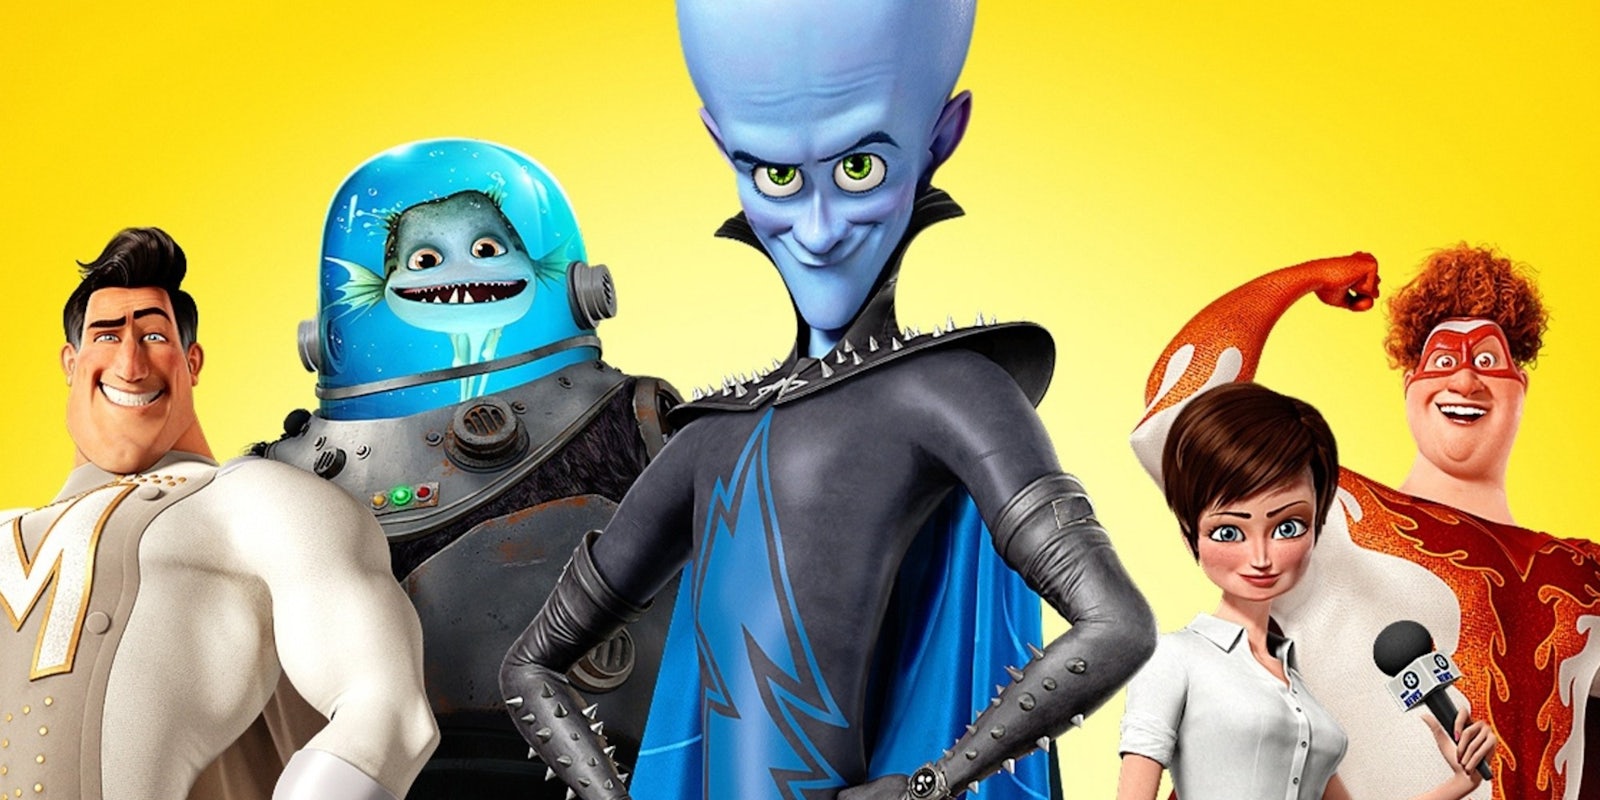 Megamind cast from poster